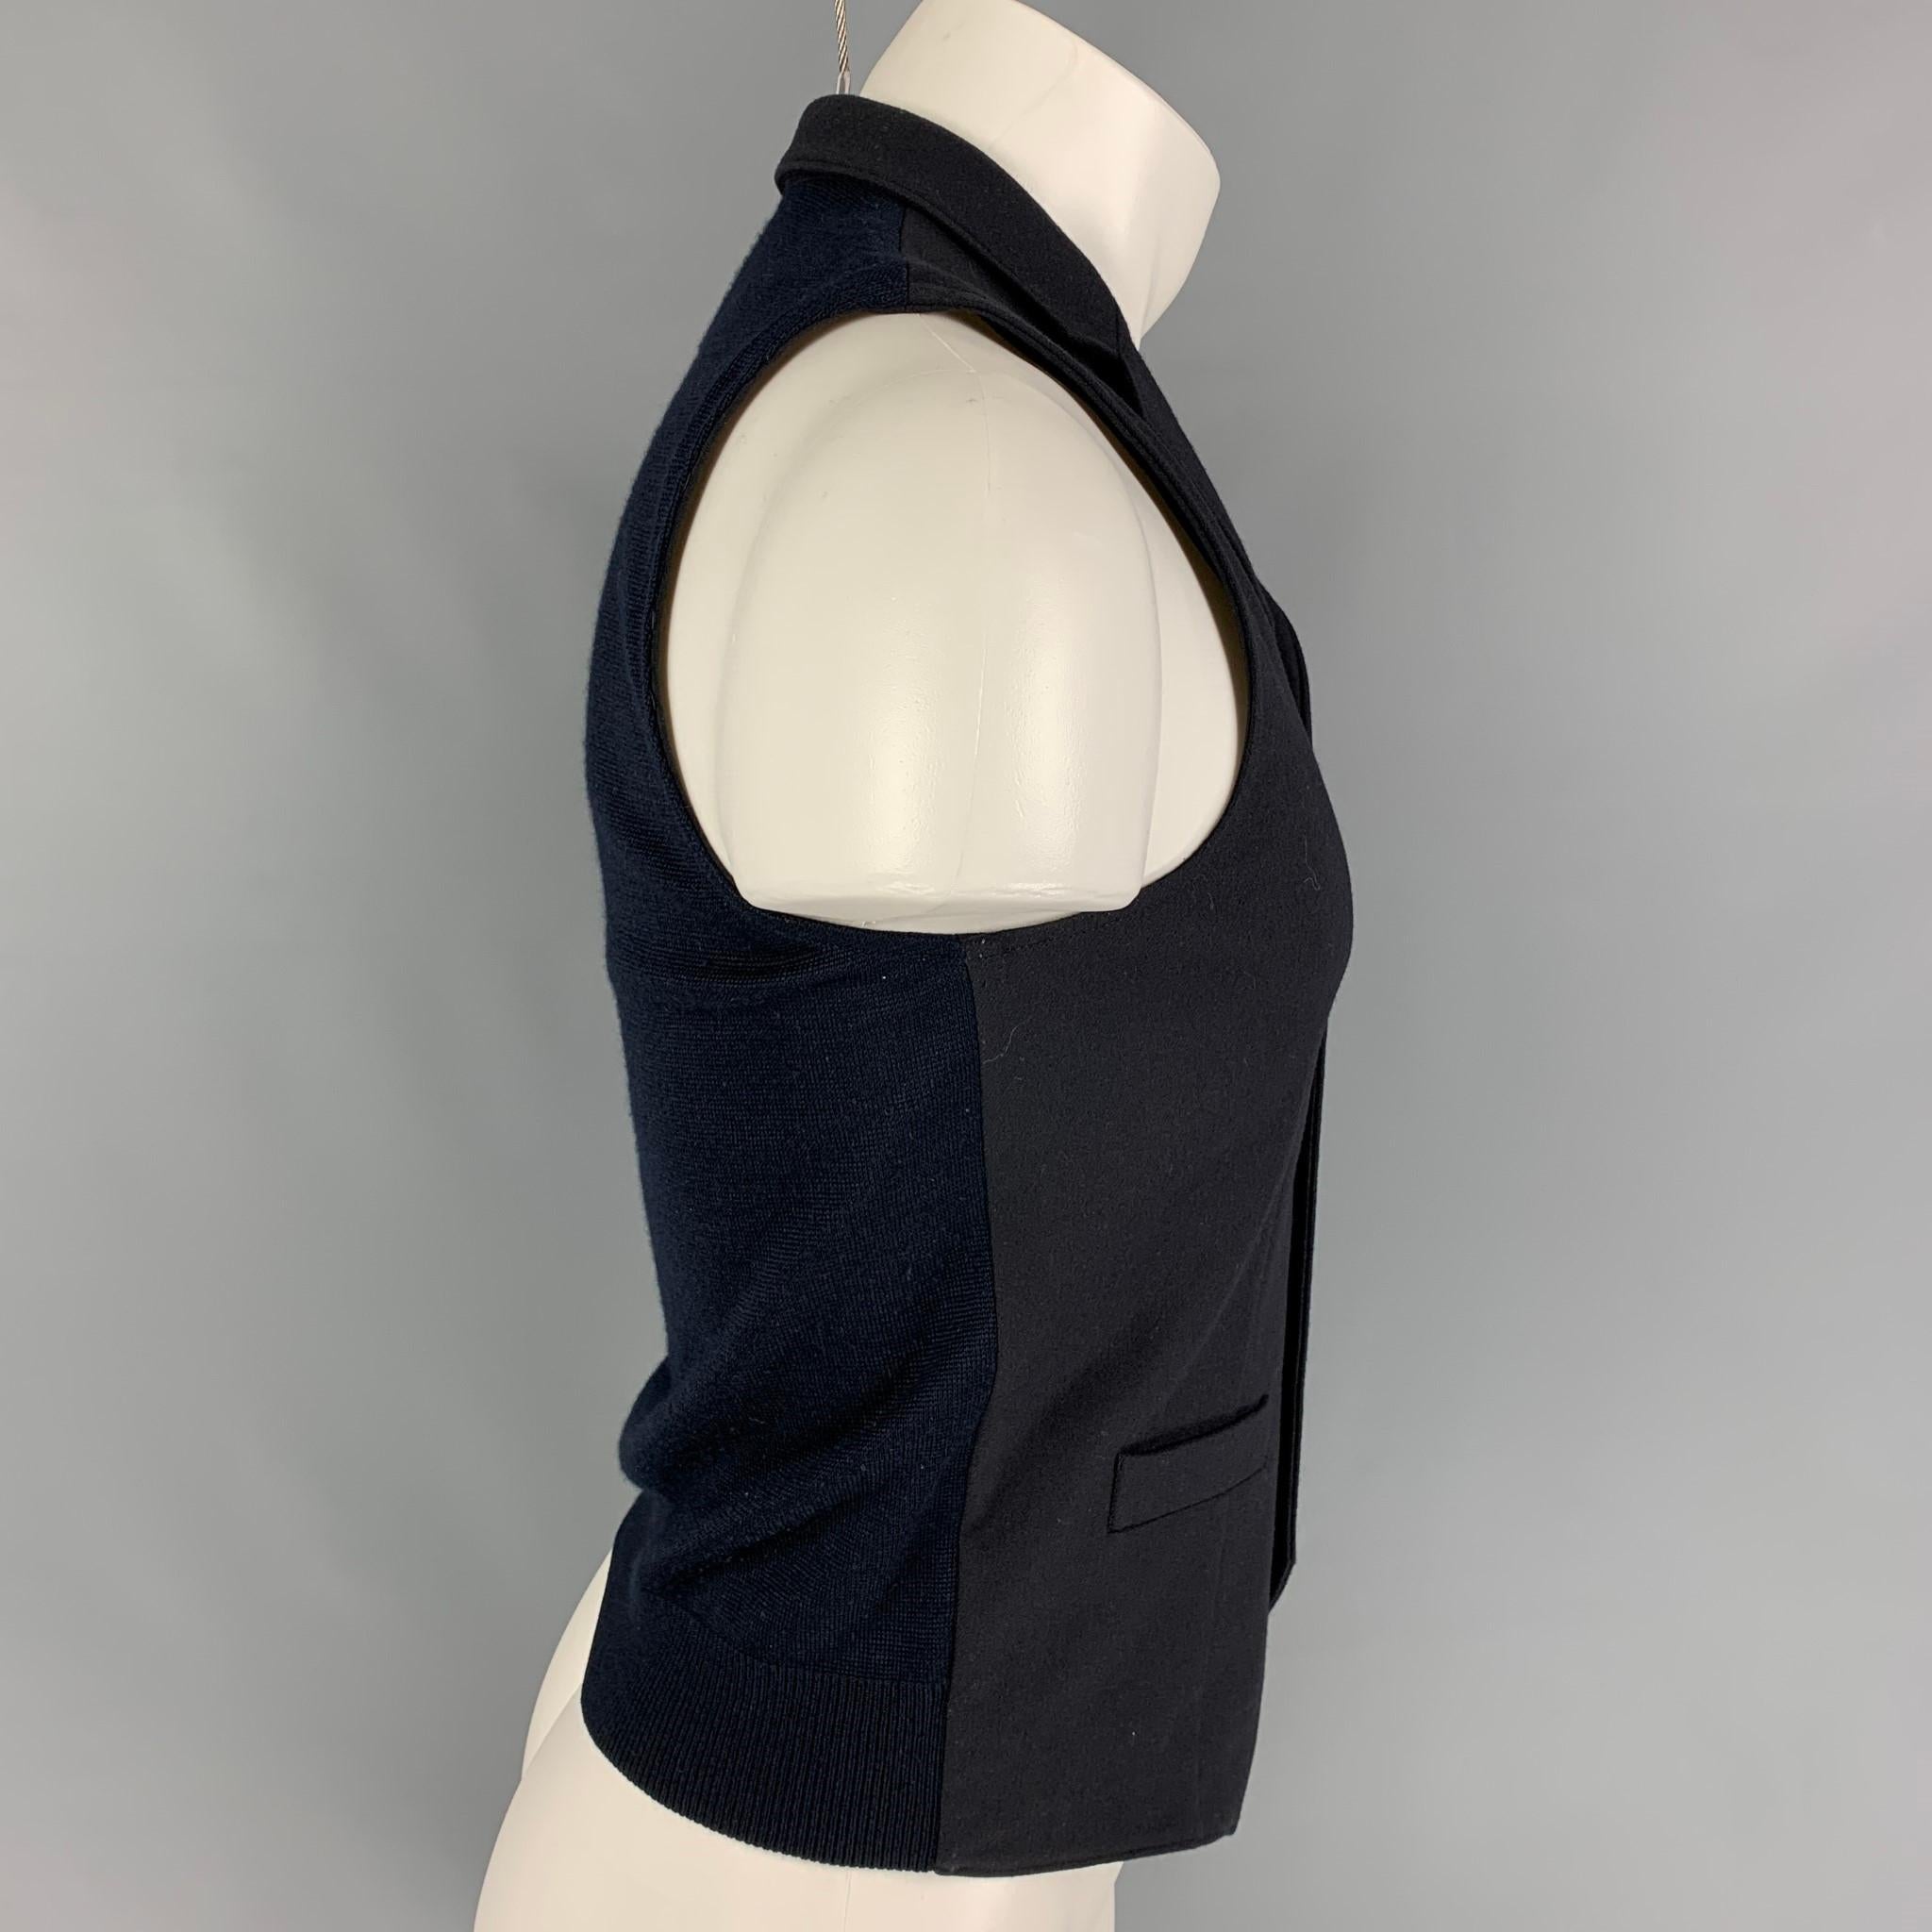 EMPORIO ARMANI vest comes in a navy wool blend featuring a knitted back, notch lapel, and a snap button closure. 

Very Good Pre-Owned Condition.
Marked: 44

Measurements:

Shoulder: 12.5 in.
Chest: 34 in.
Length: 22 in. 